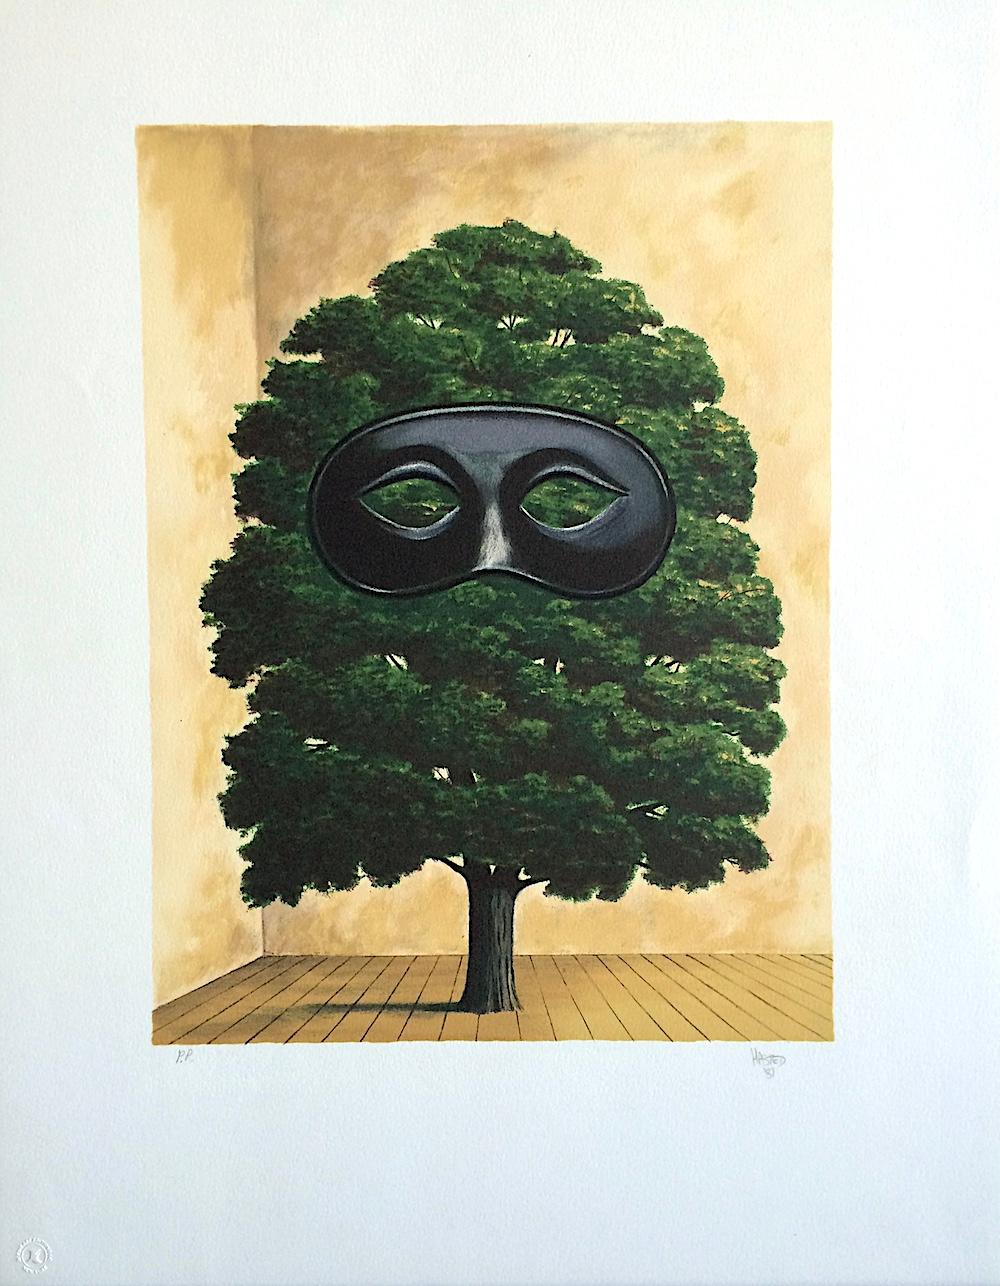 Michael Hasted Landscape Print - THE BIG PARADE Hand Drawn Lithograph, Surrealist Interior Scene, Tree w Mask, 